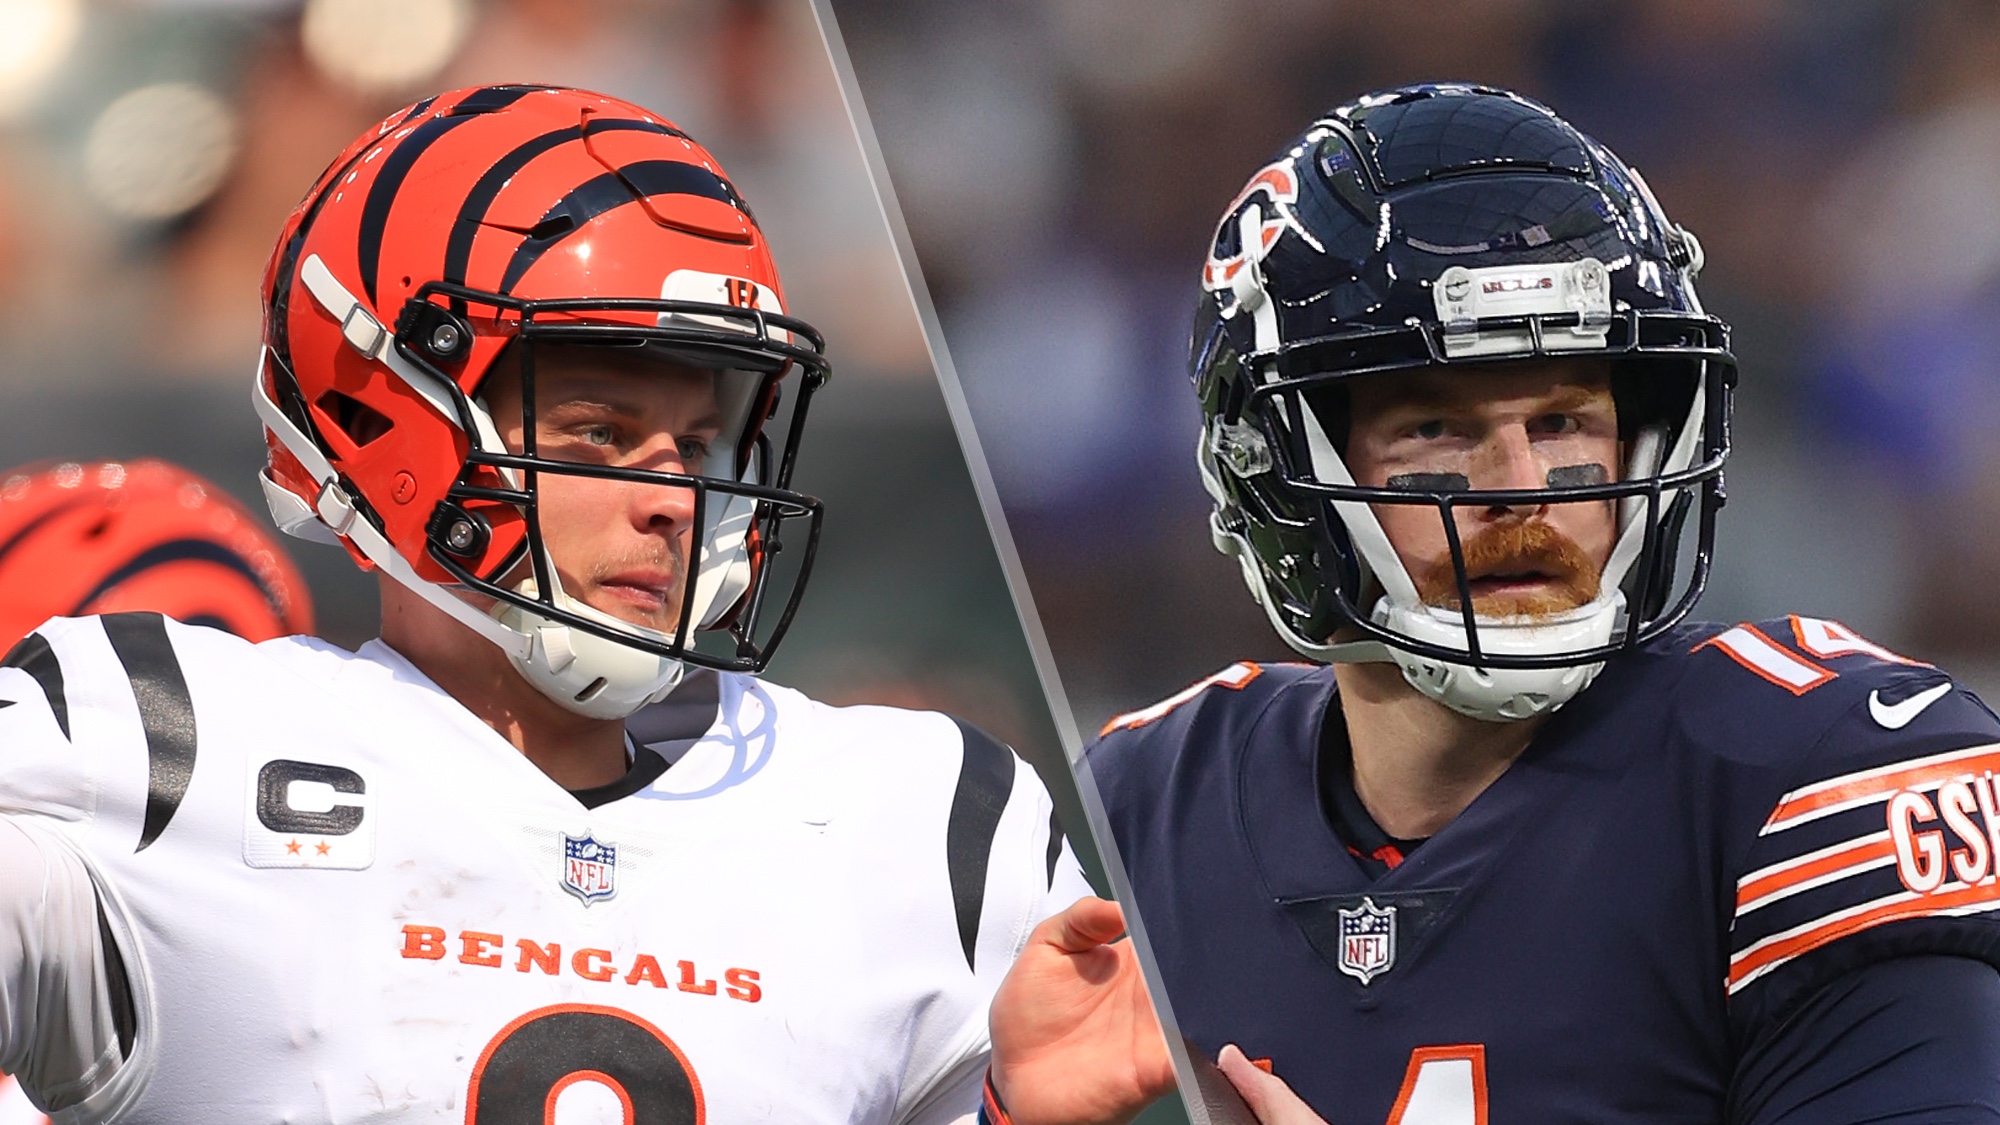 Bengals vs. Titans game will be streamed on Paramount Plus